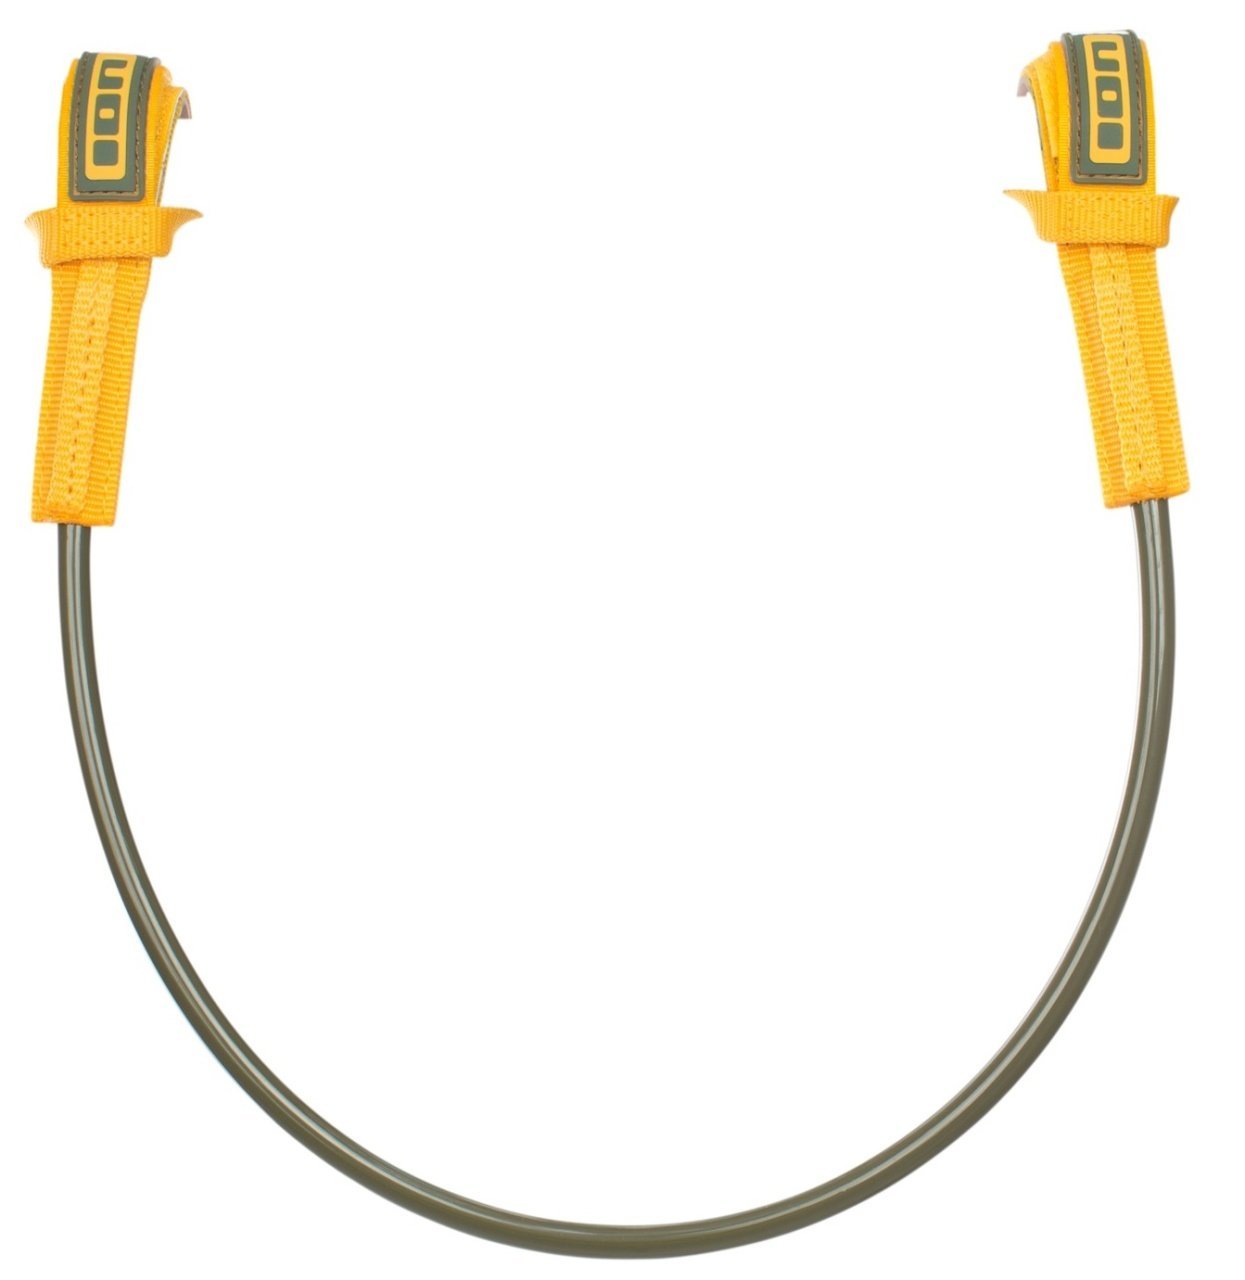 ION Harness Lineset Fix Pro - Olive 22